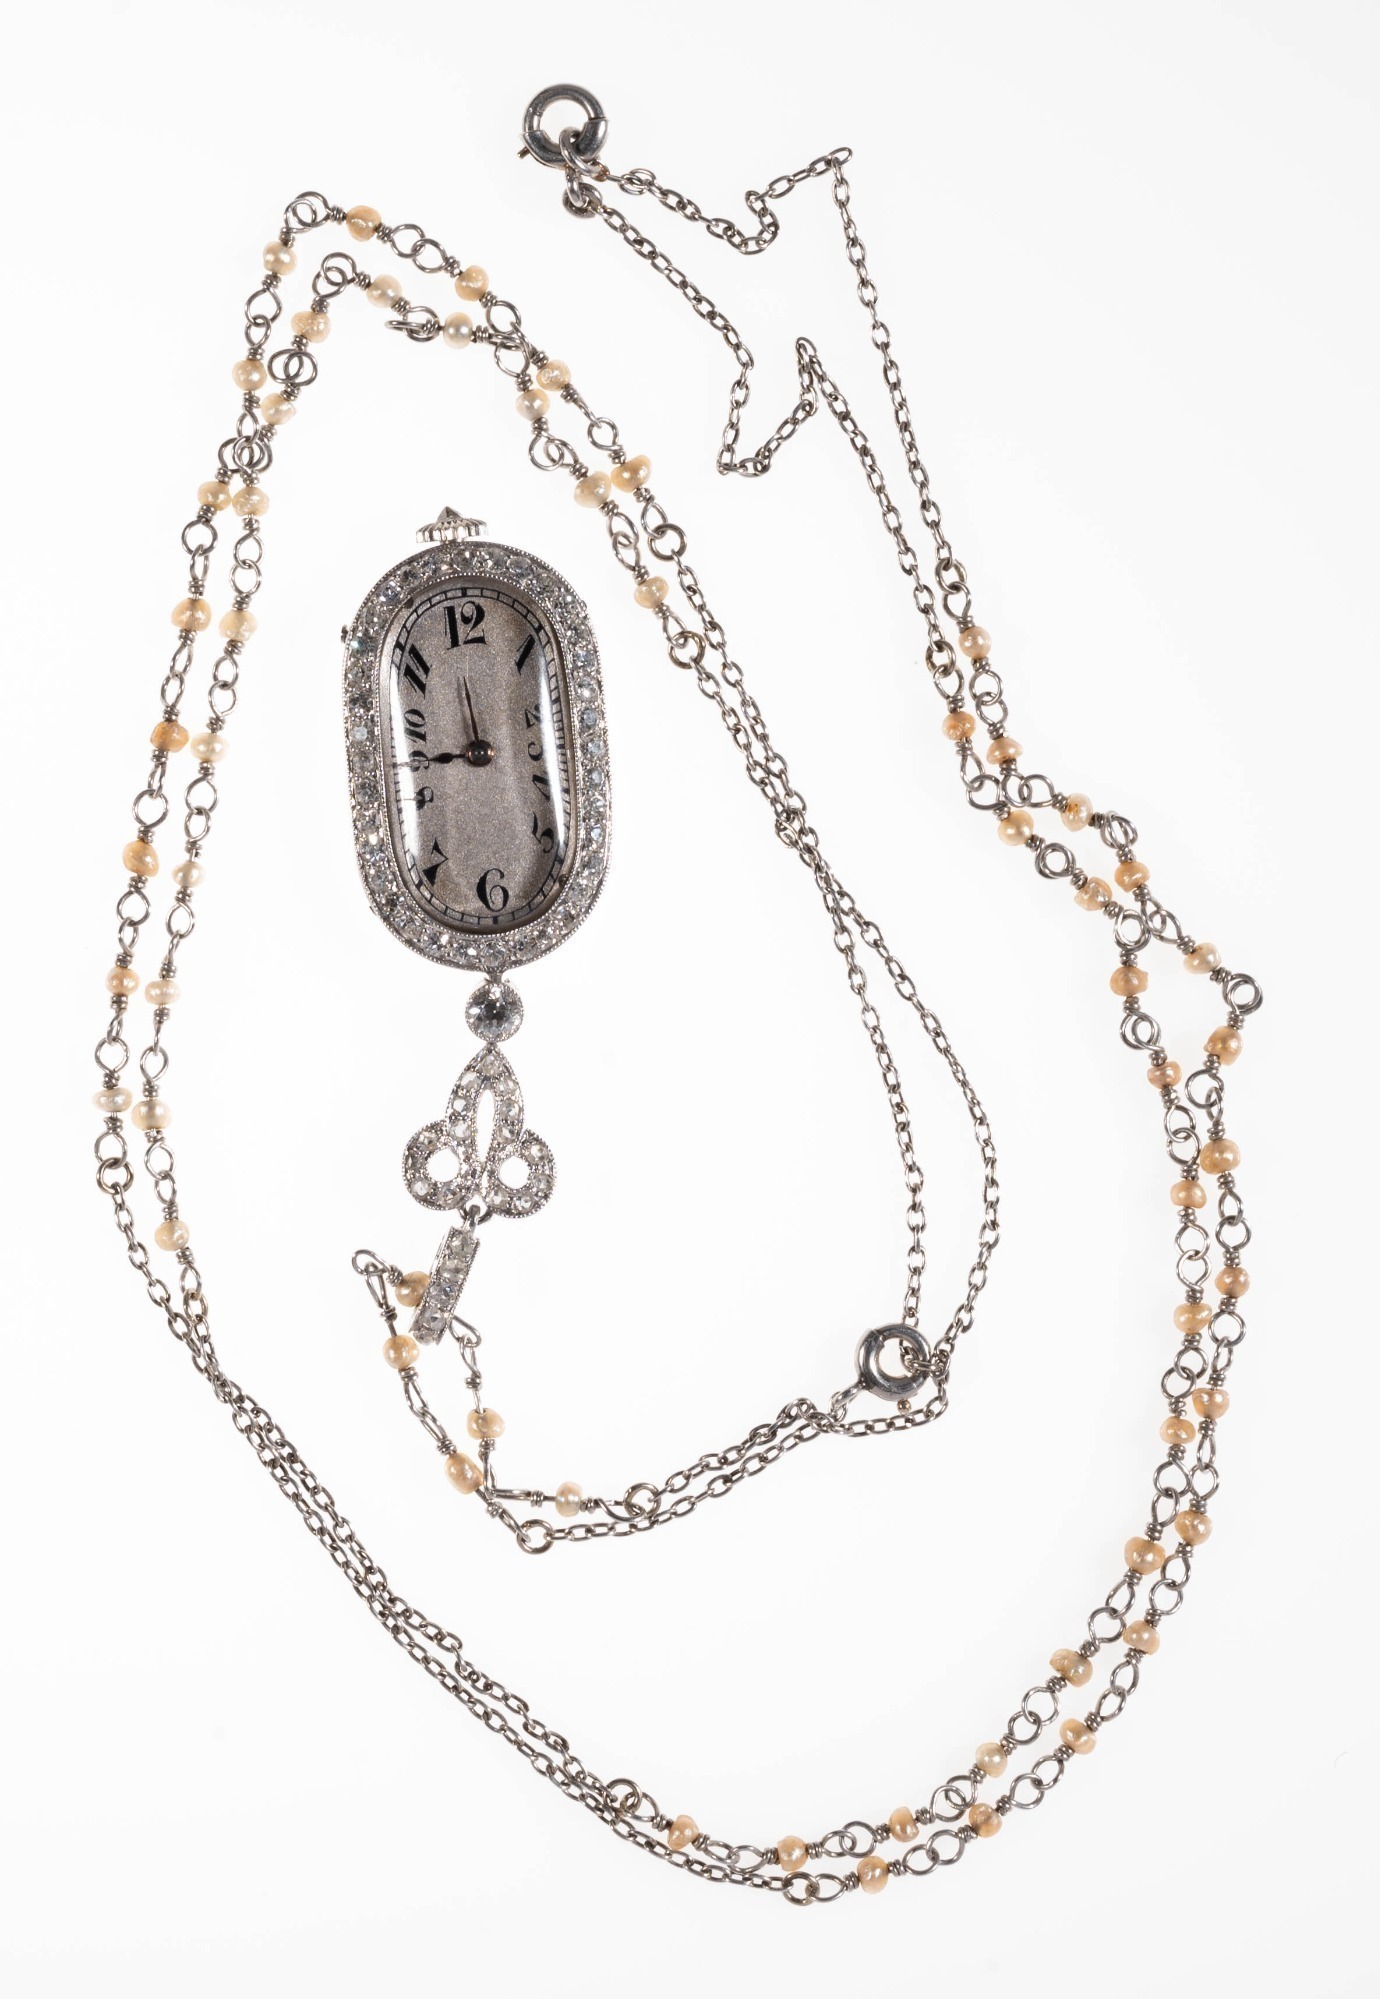 ART DECO PLATINUM AND DIAMOND PENDANT WATCH WITH PLATINUM AND SEED PEARL CHAIN